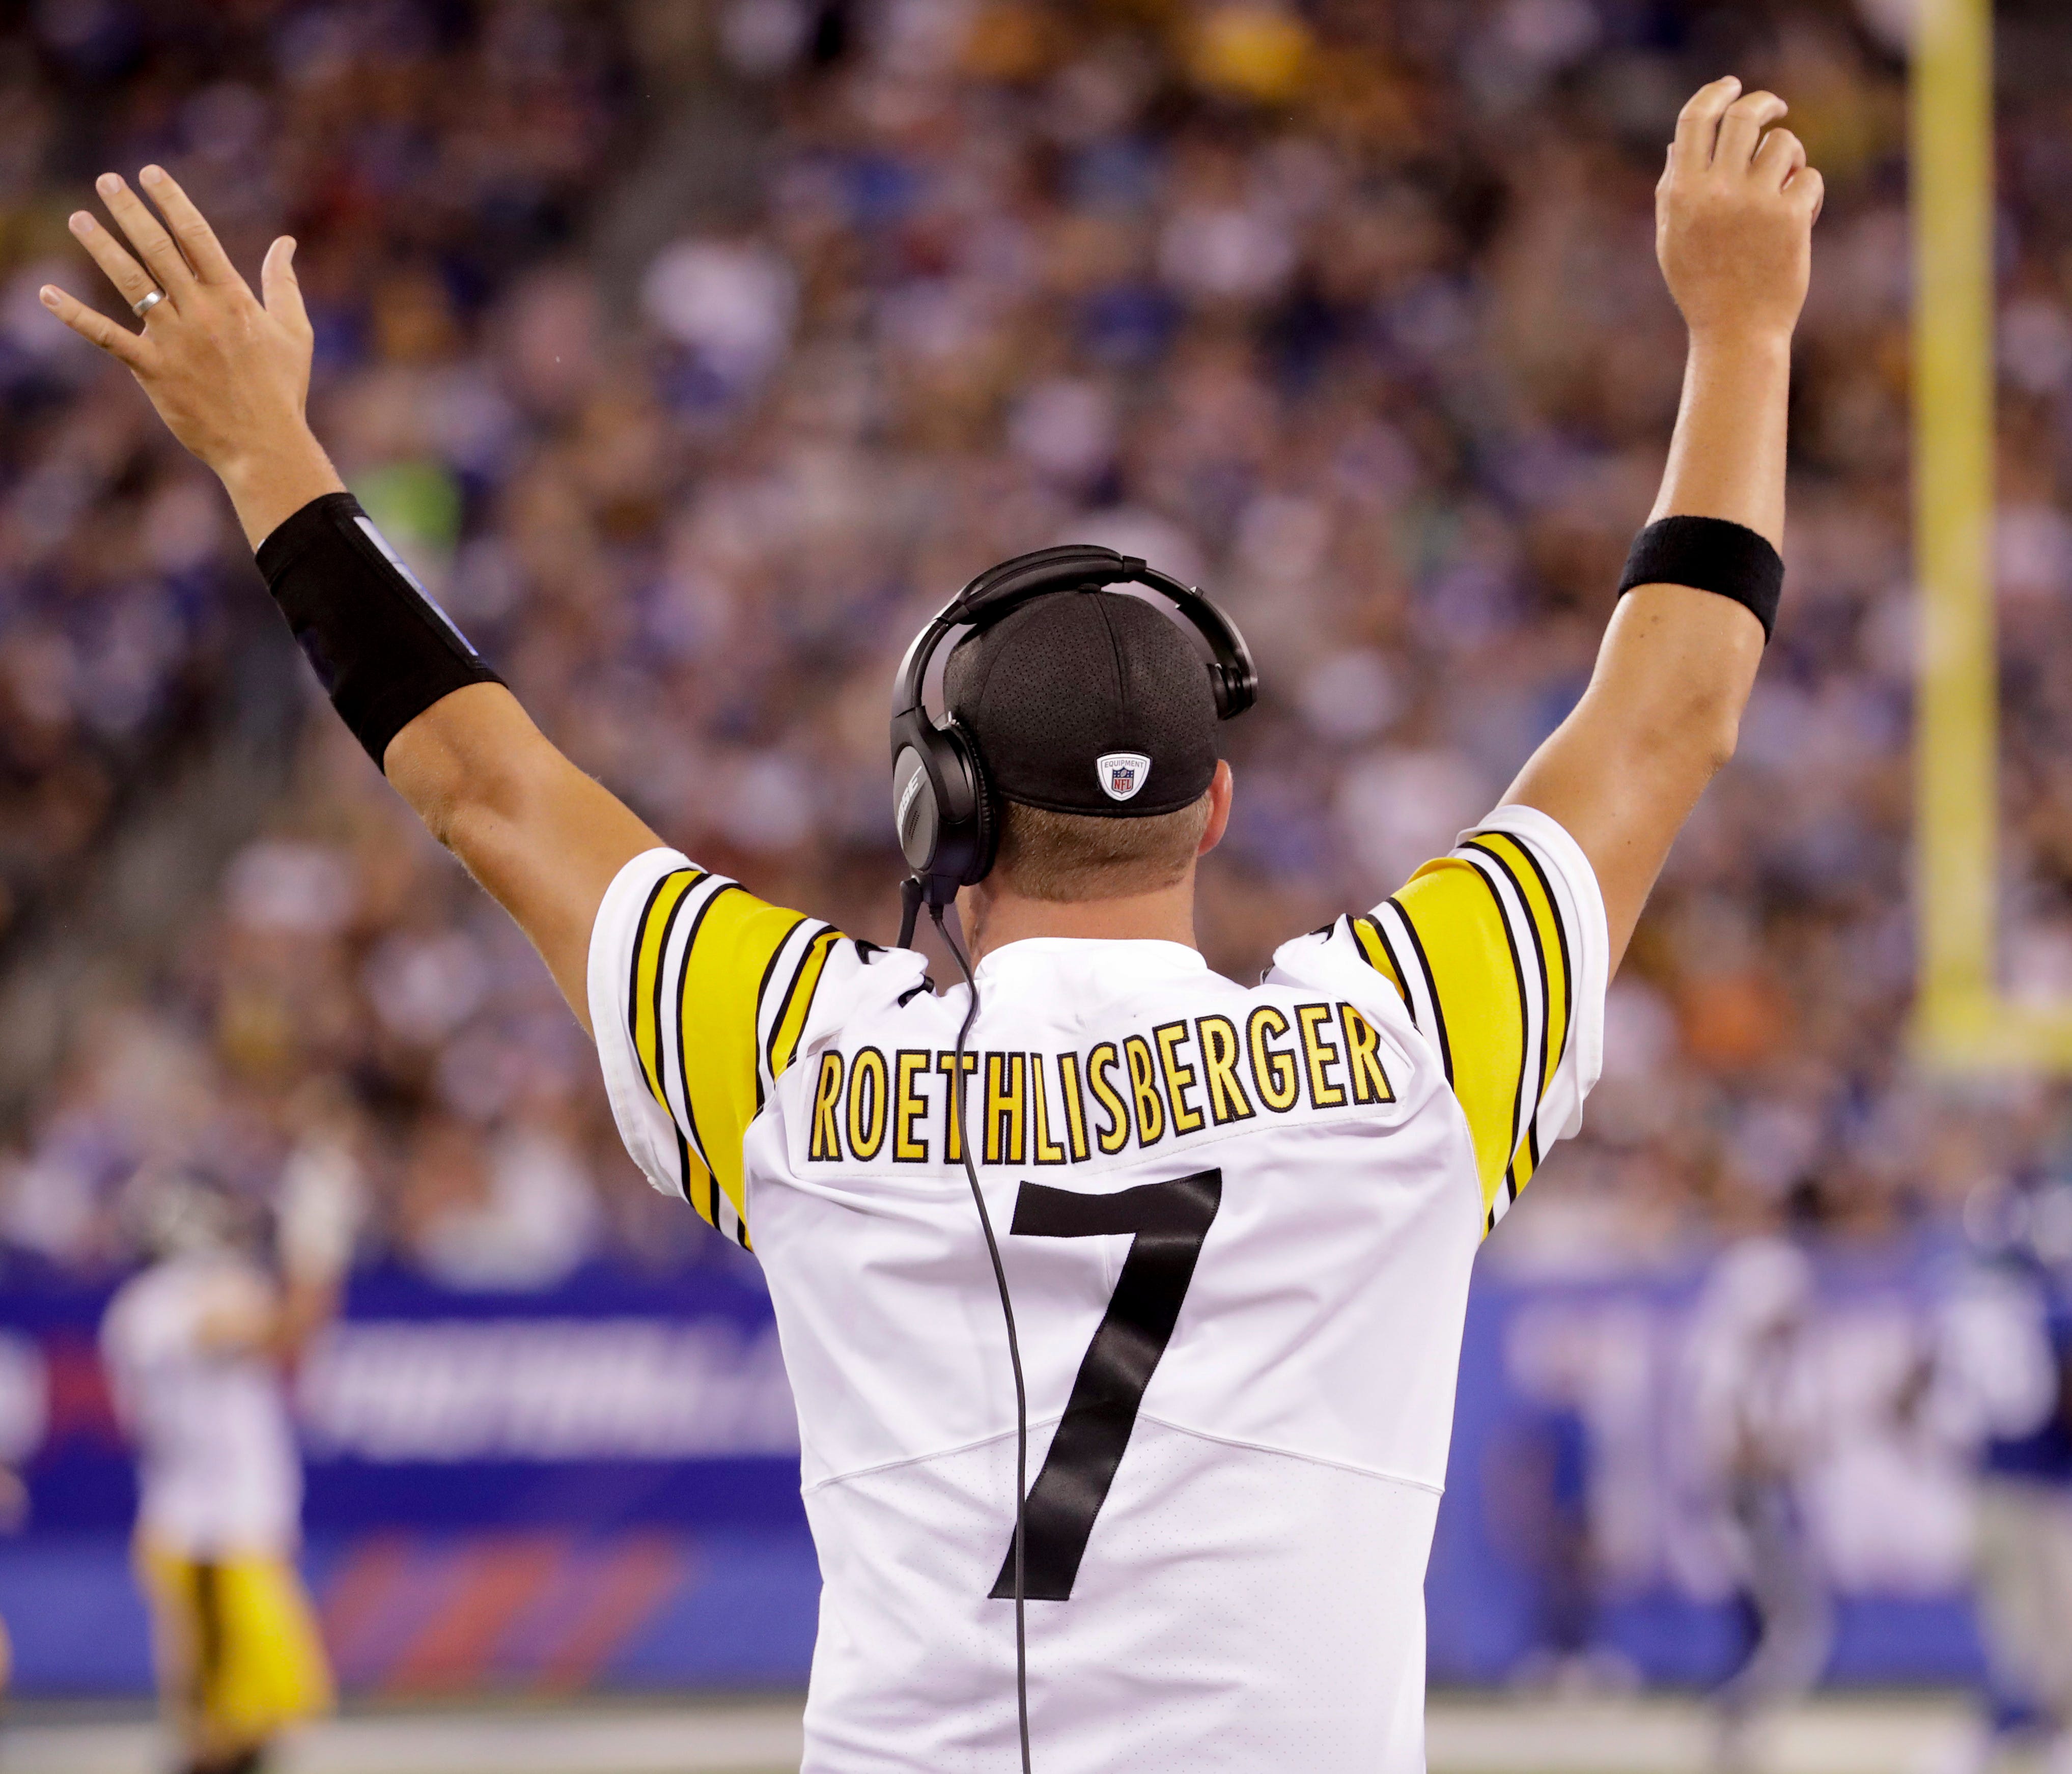 Pittsburgh Steelers quarterback Ben Roethlisberger (7) reacts on the sidelines during the third quarter of a preseason NFL football game against the New York Giants, Friday, Aug. 11, 2017, in East Rutherford, N.J. (AP Photo/Julio Cortez) ORG XMIT: ER